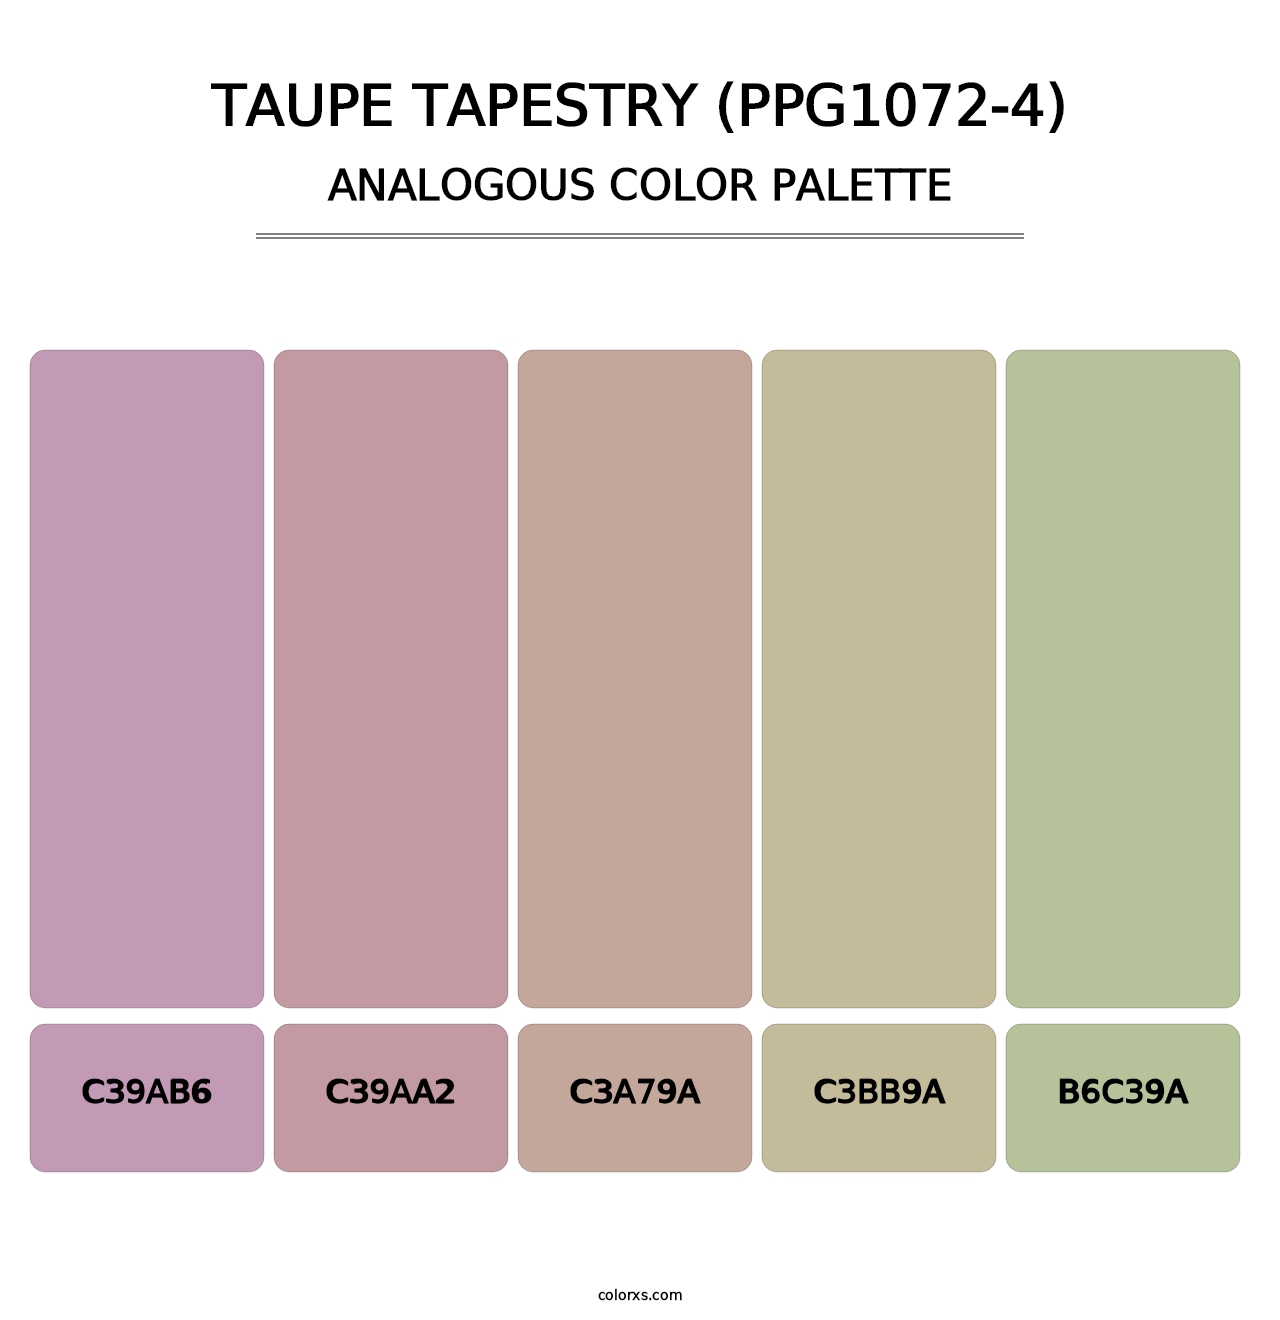 Taupe Tapestry (PPG1072-4) - Analogous Color Palette